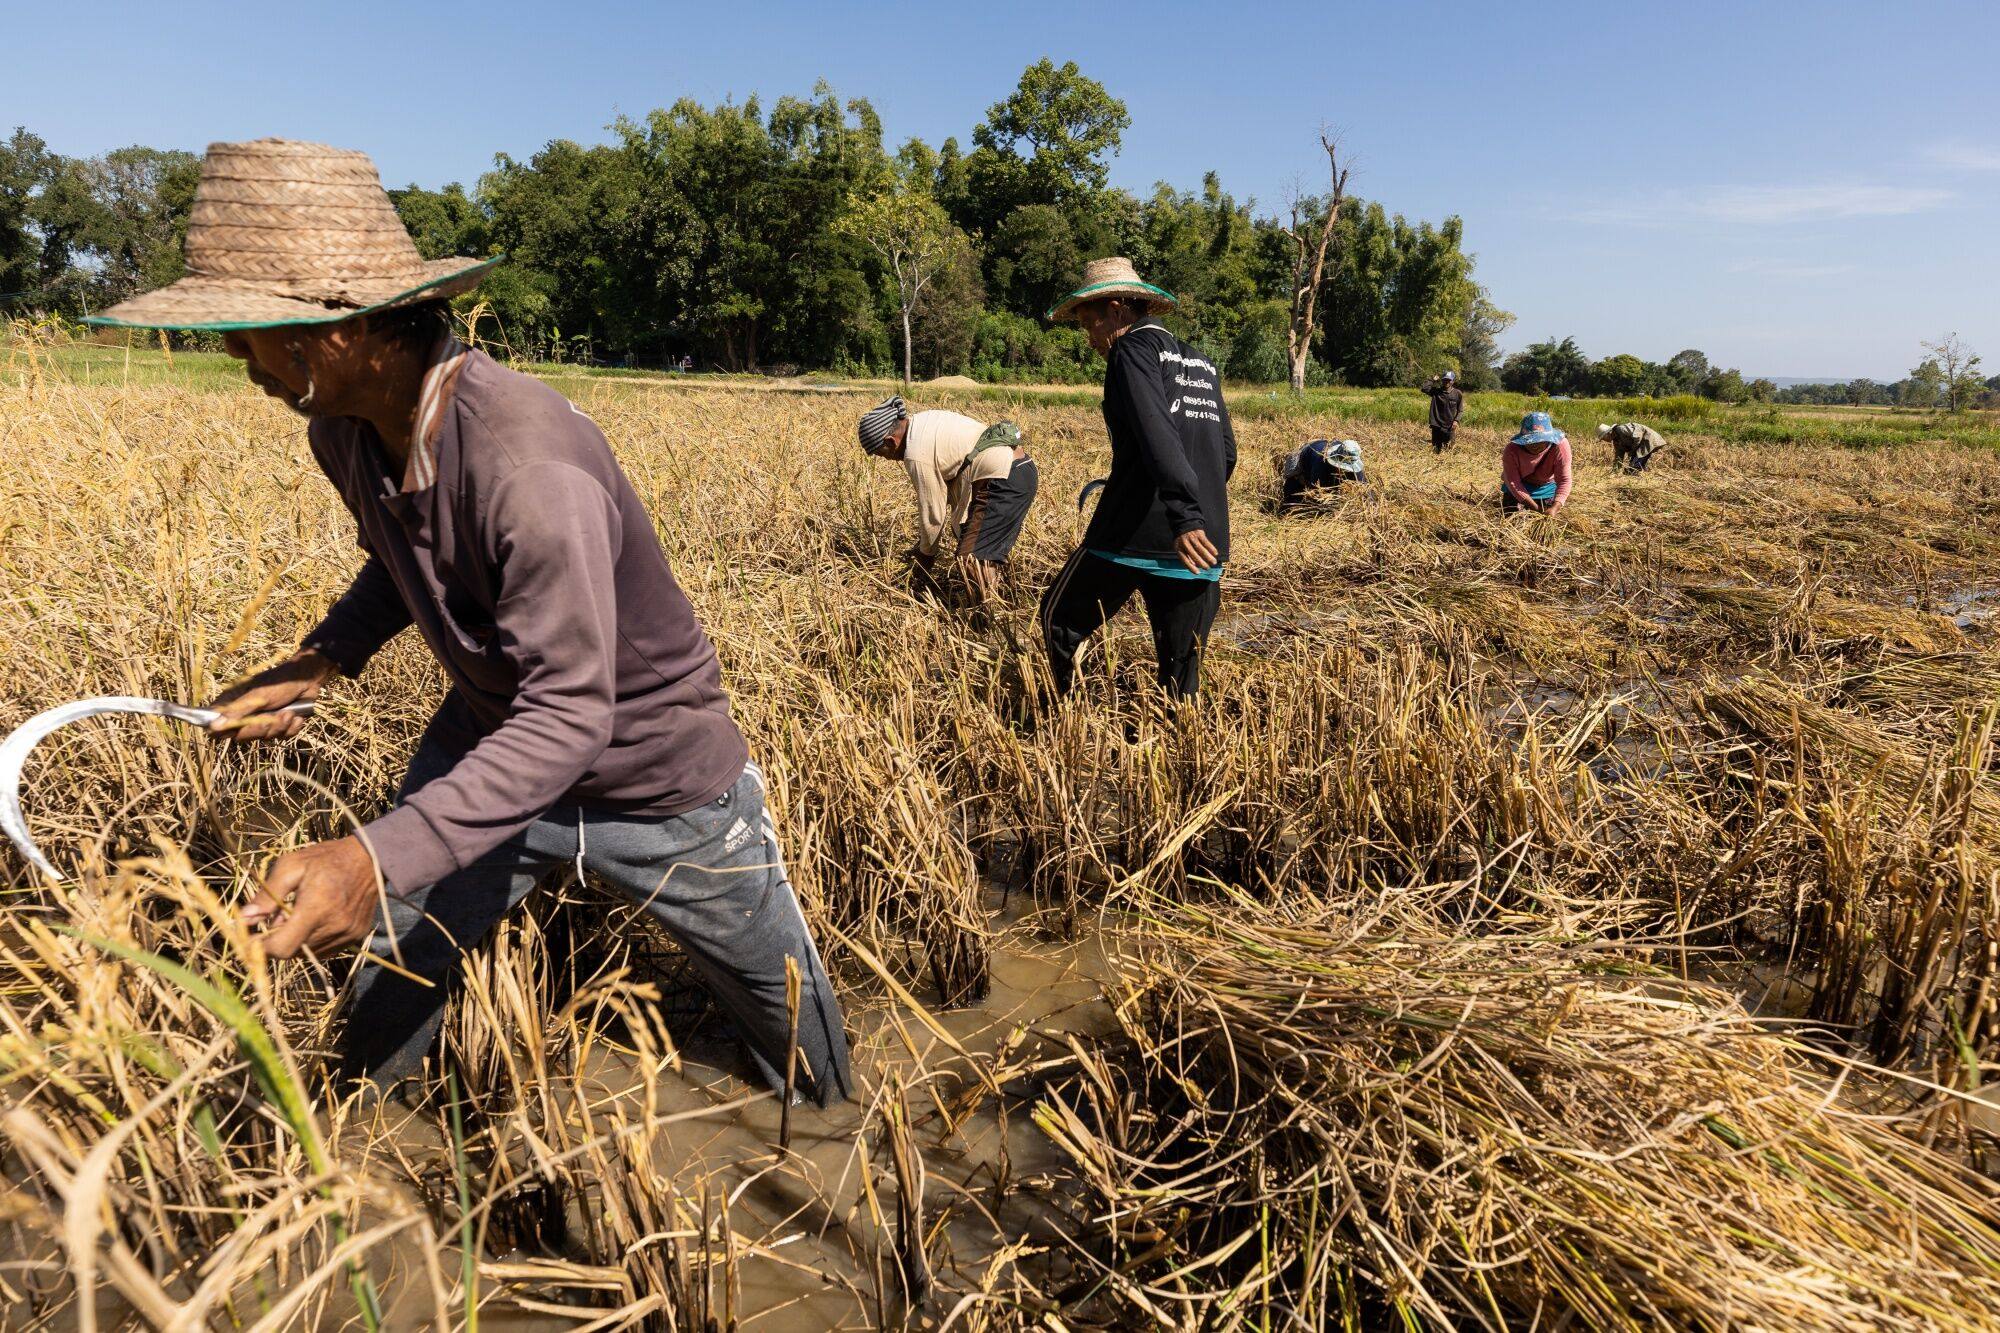 Farmers harvest paddy rice stalks by hand on a farm land in Kalasin province, Thailand, in November. El Niño conditions have clipped rice production in Asia this year. Photo: Bloomberg